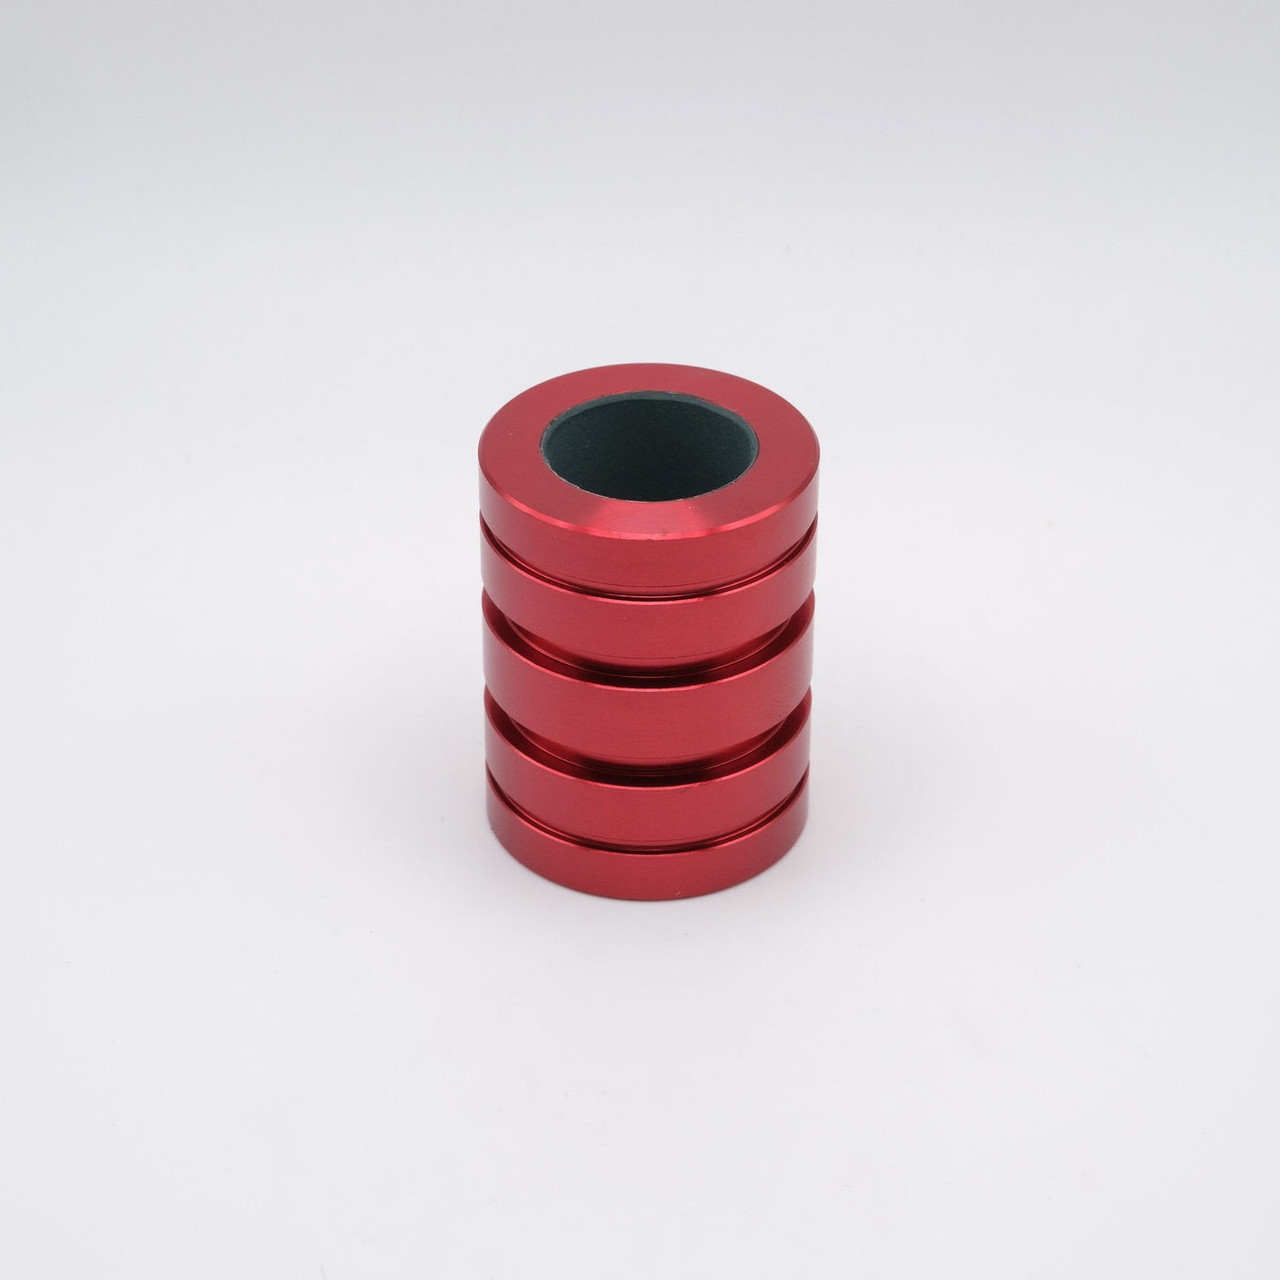 SWP04 Inch Size Linear Plain Bearing PTFE Lined 1/4x1/2x3/4 Front View